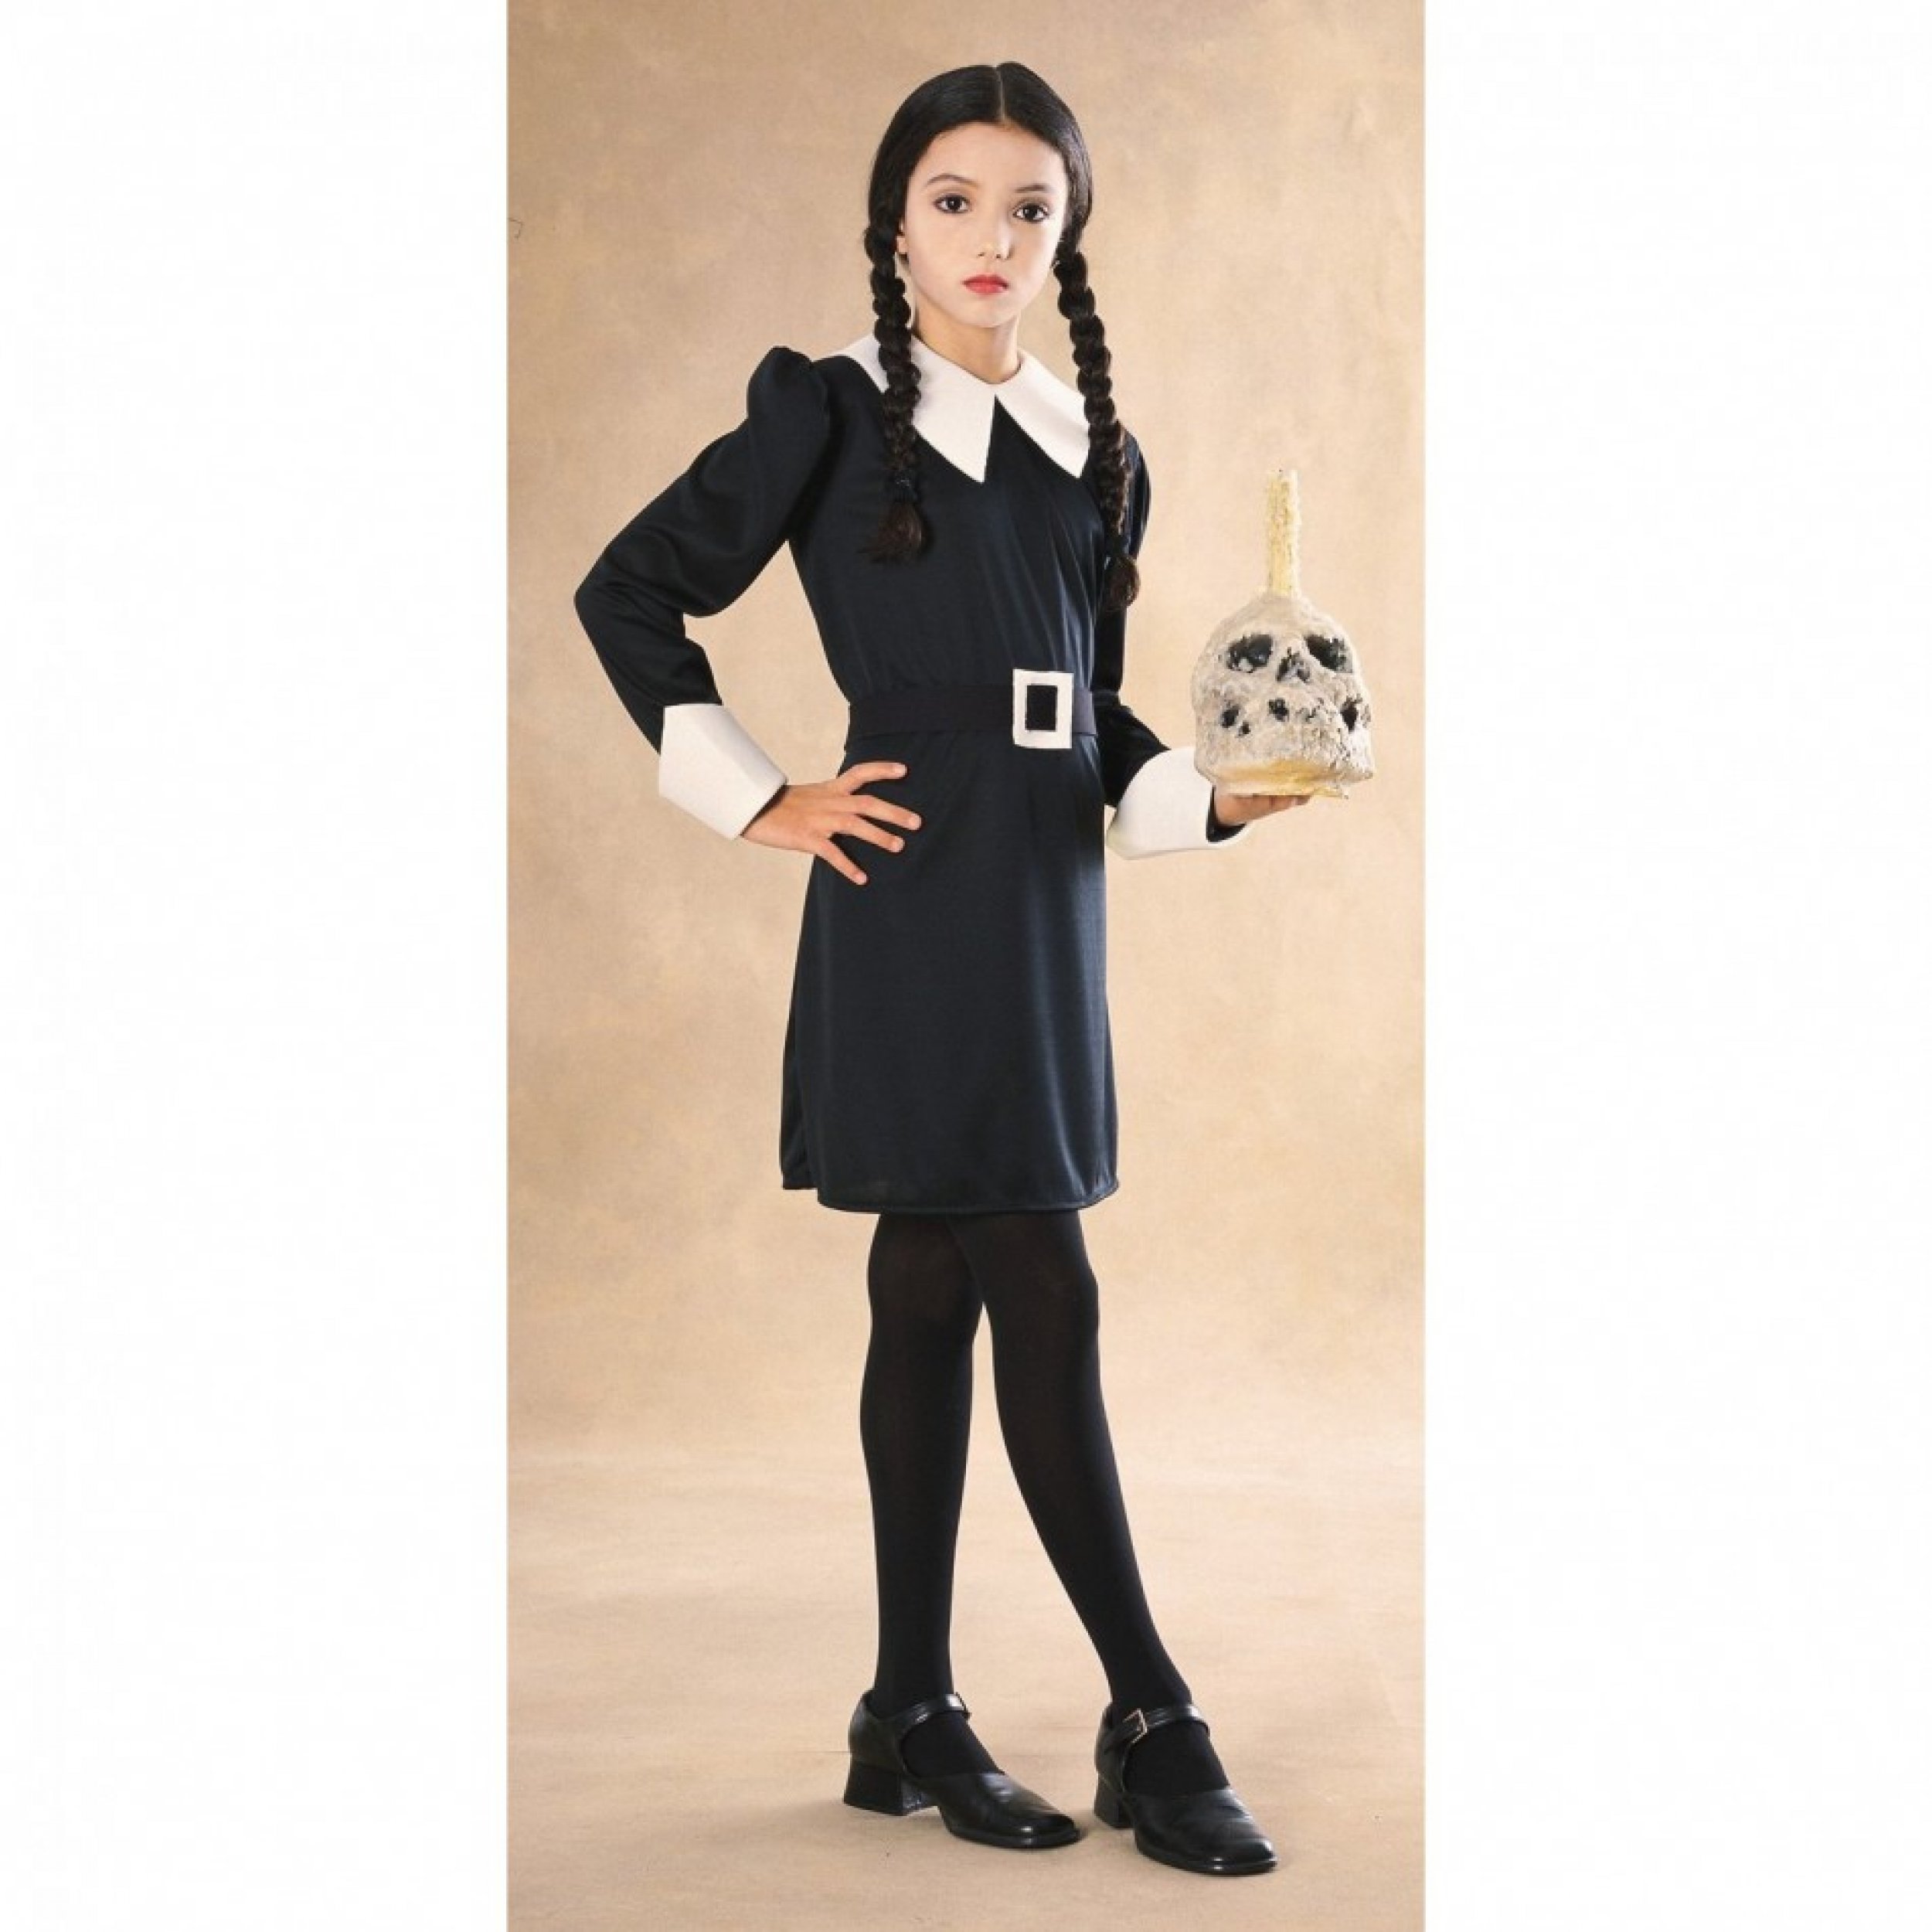 Addams Family Childs Wednesday Addams Costume